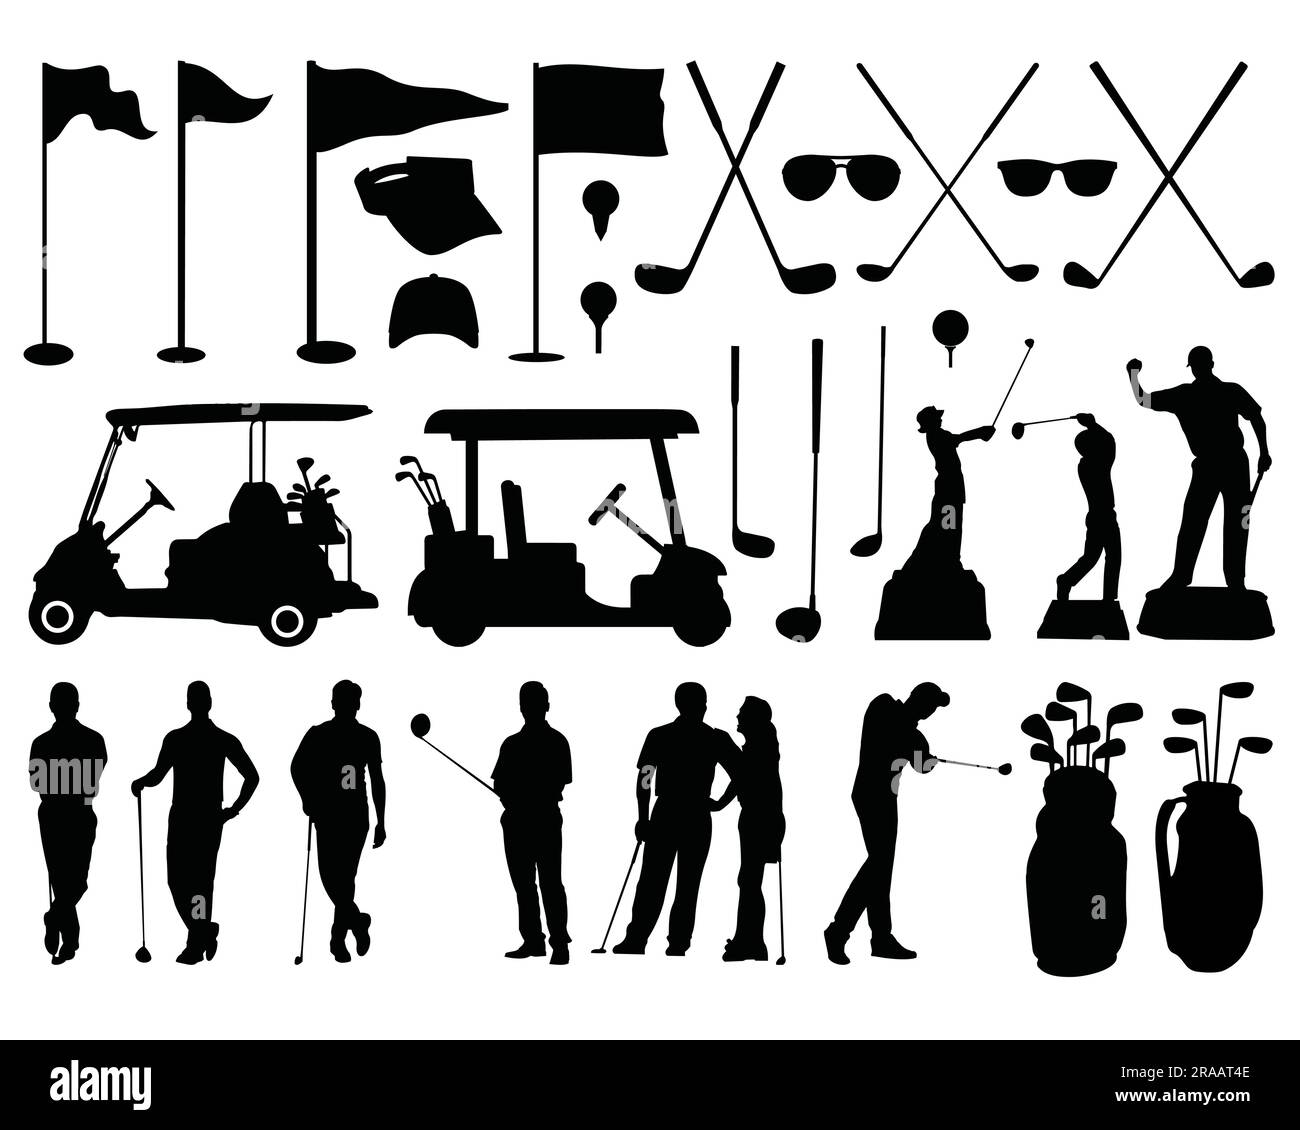 Set of Golf Silhouette Stock Vector